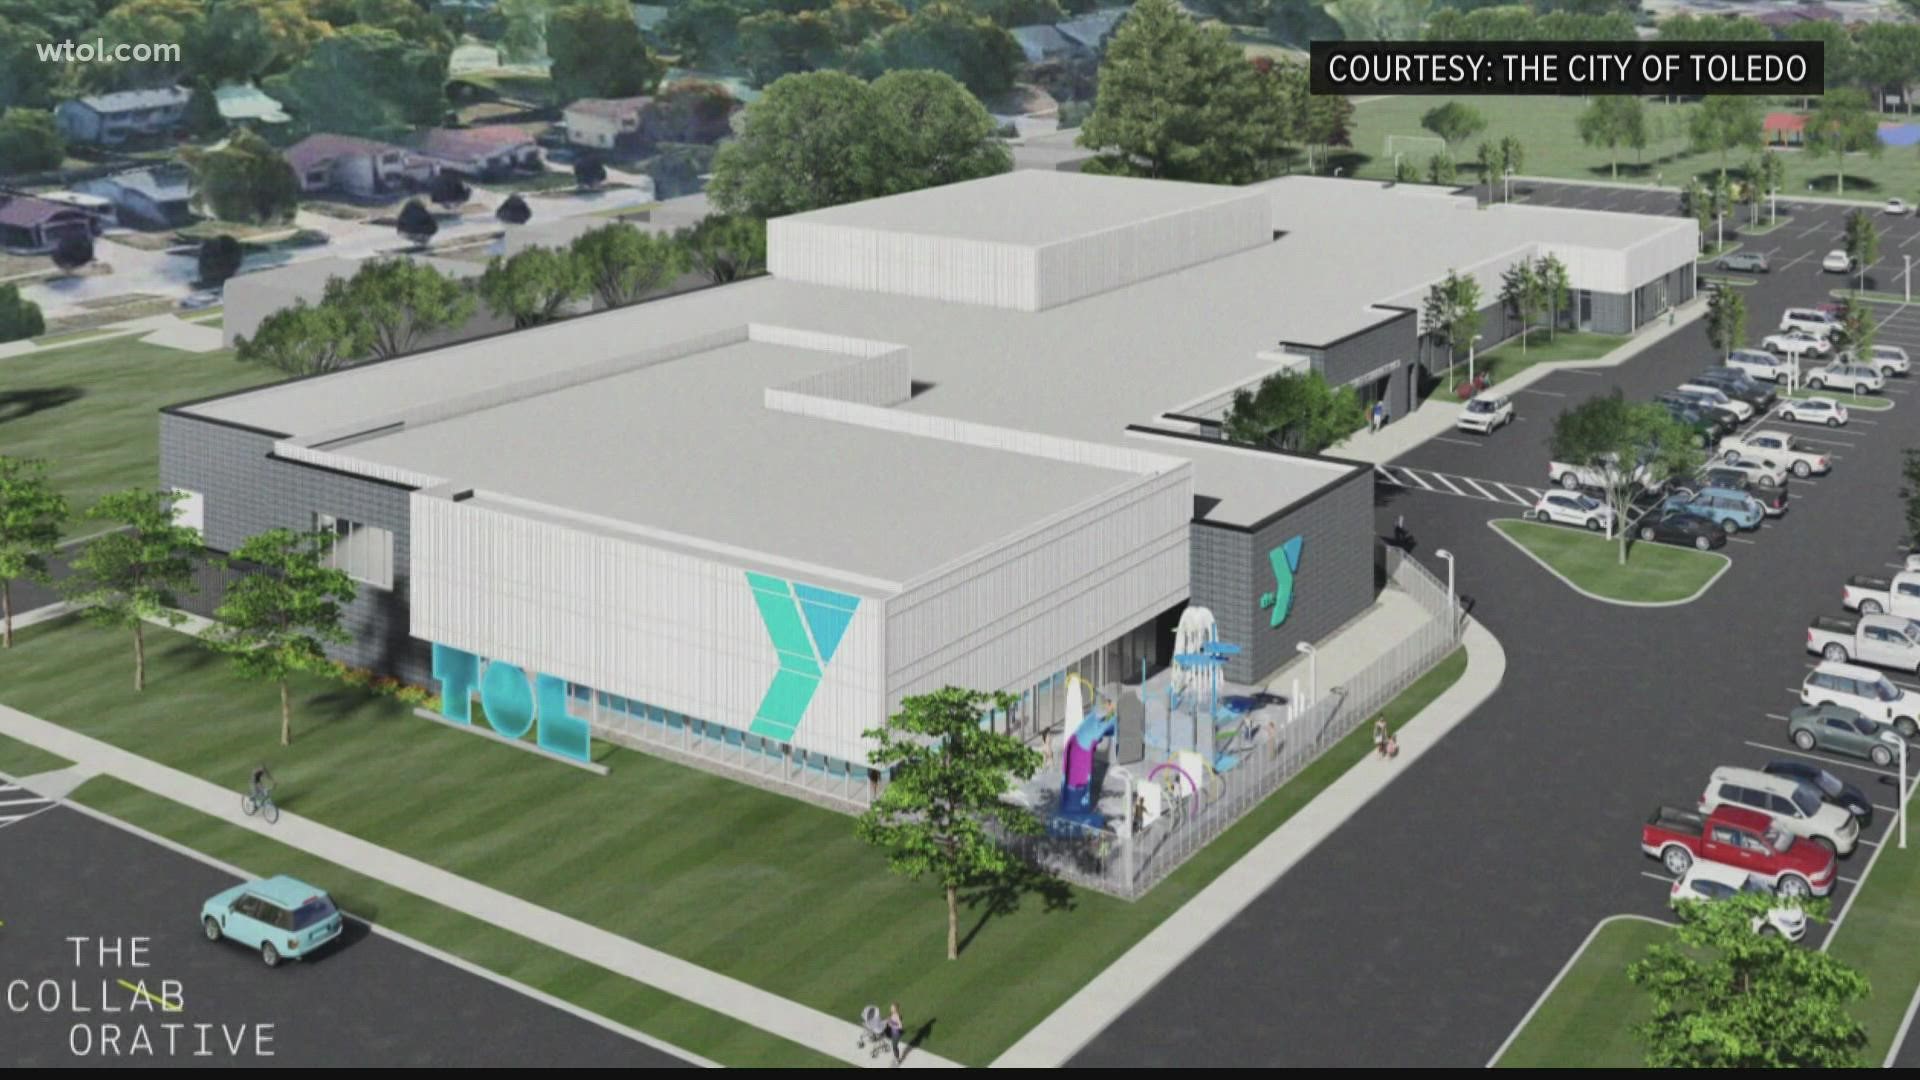 The planned $21M building is to include multipurpose rooms for youth gaming, a demonstration kitchen, meeting rooms, gymnasiums and an indoor pool among other items